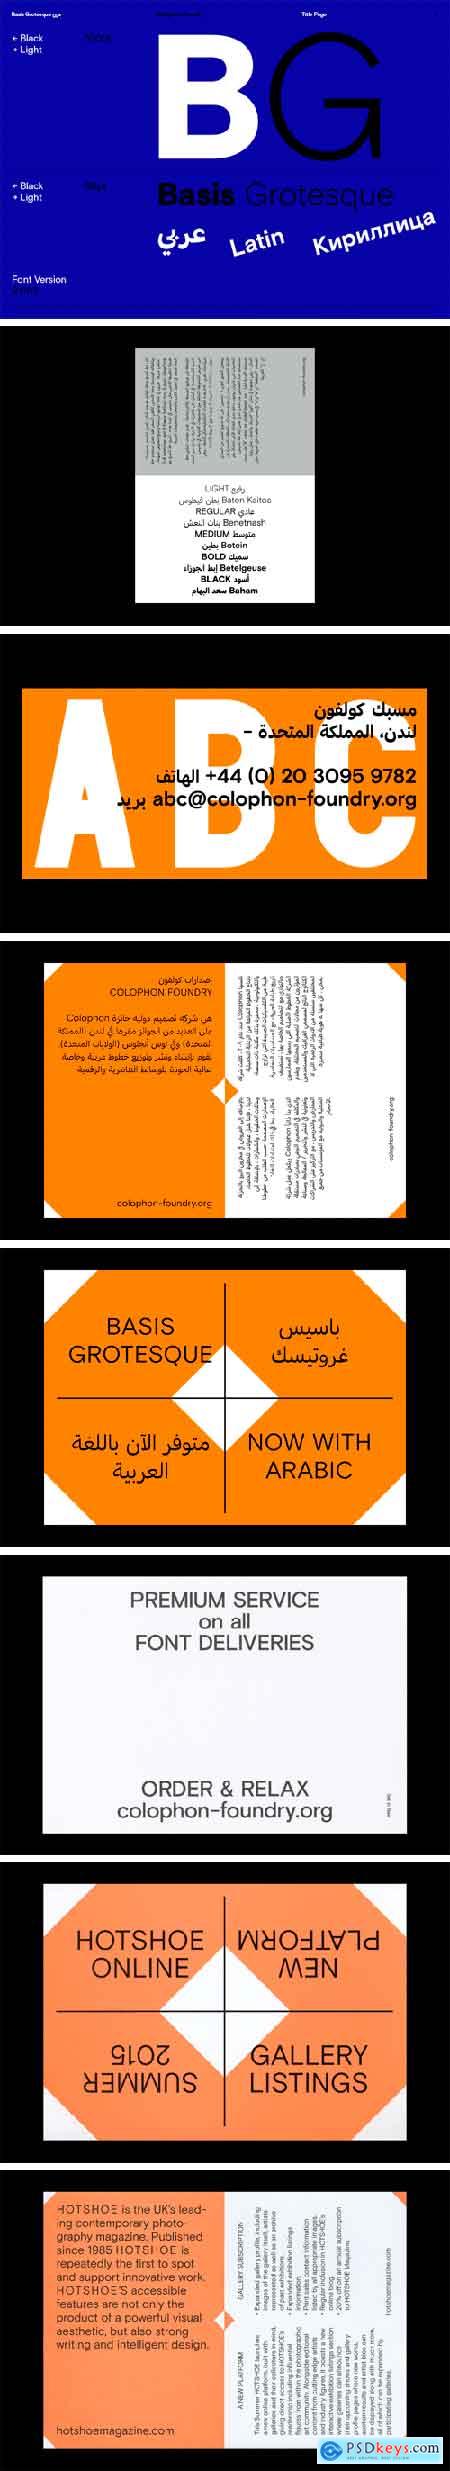 Basis Grotesque PRO Font Family (Arabic + Cyrillic Support)